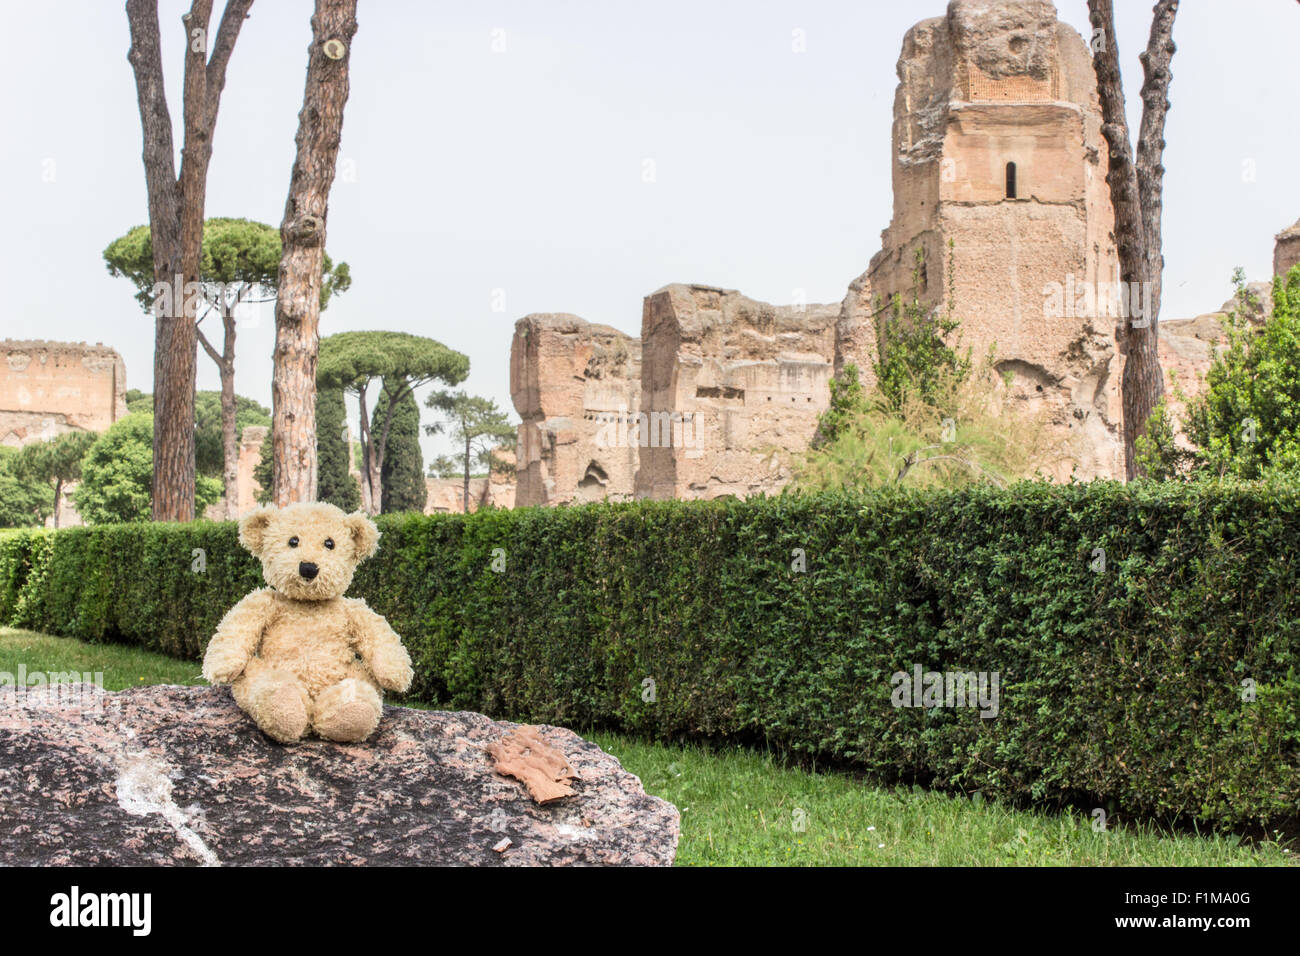 Teddy before the Baths of Caracalla in Rome Stock Photo